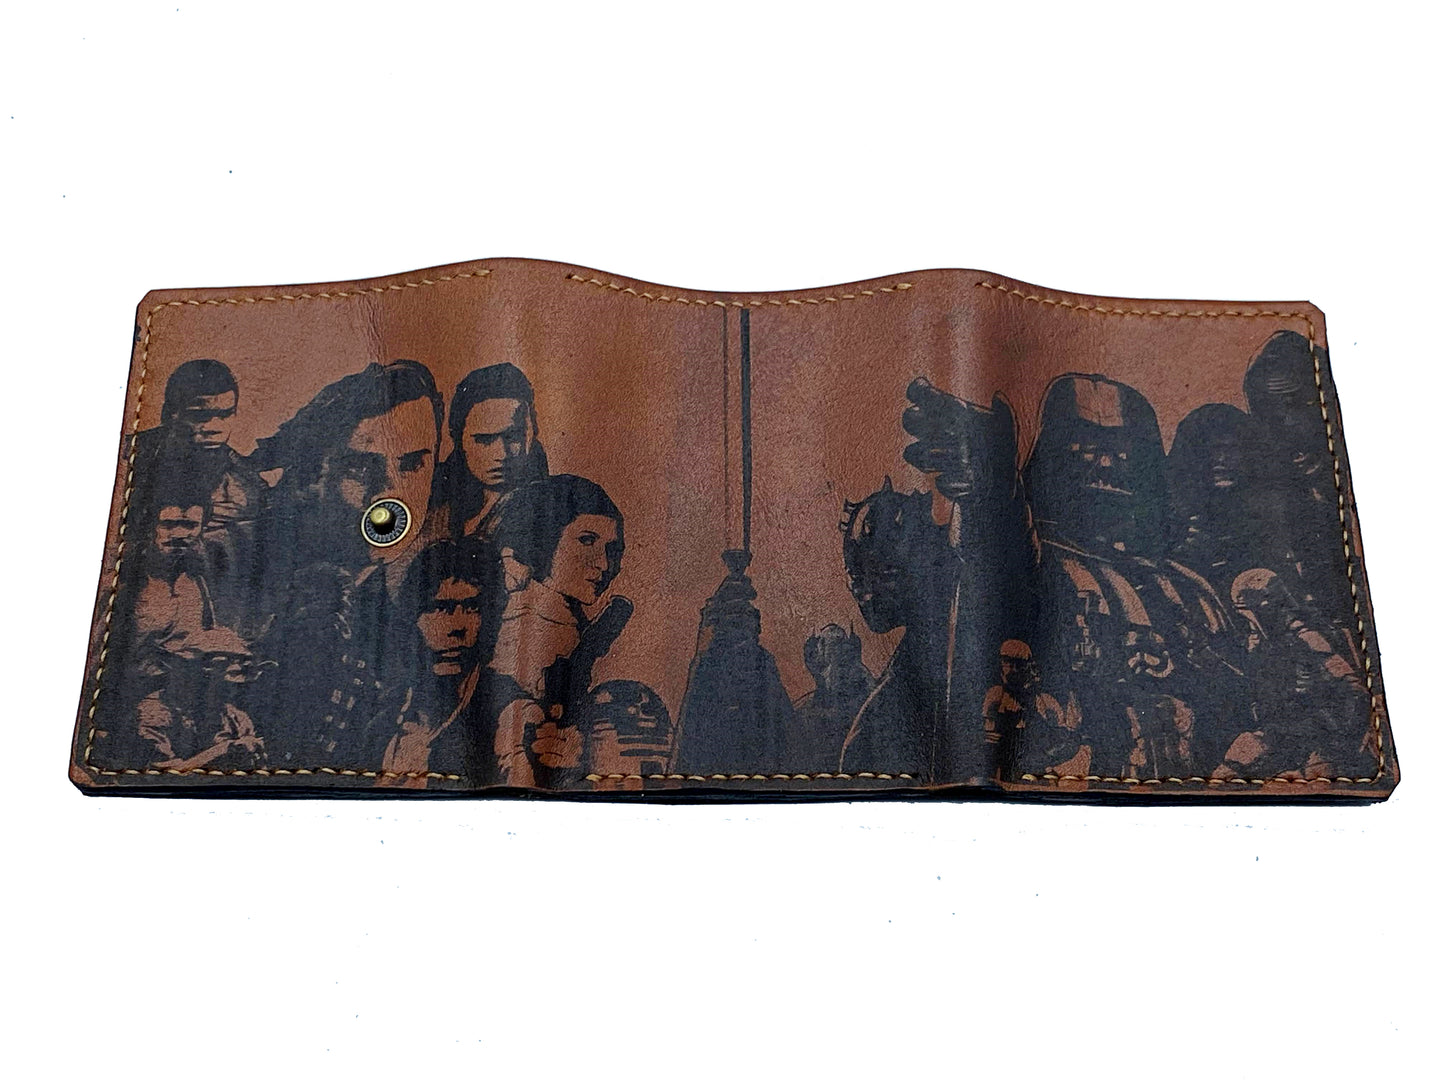 Starwars main characters personalized leather handmade men's wallet, custom birthday wedding anniversary present for him, Father boyfriend brother